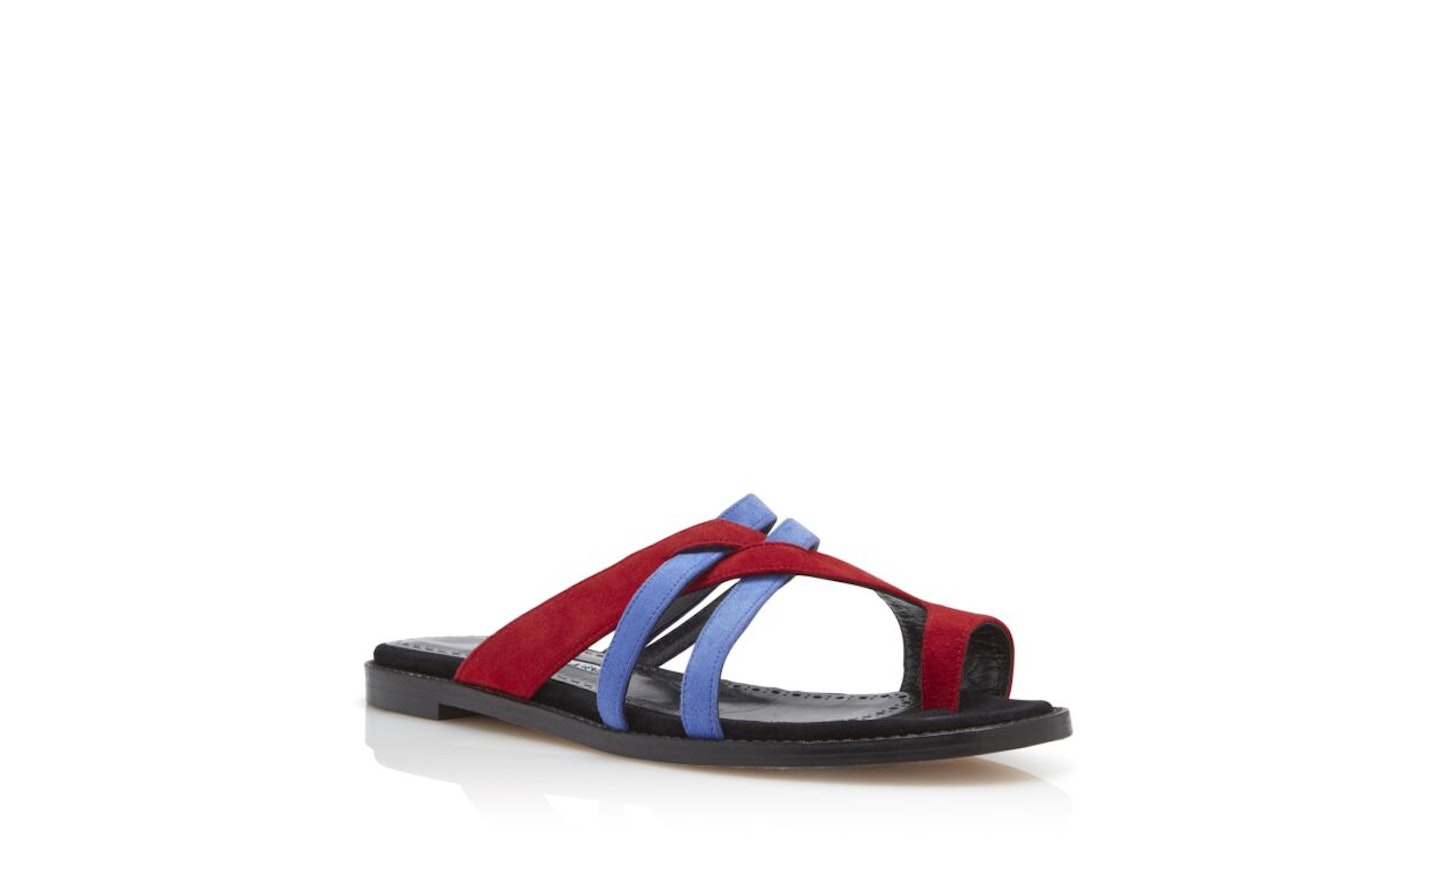 Red and Purple Suede Flat Strappy Sandals, WERE £585 NOW £293